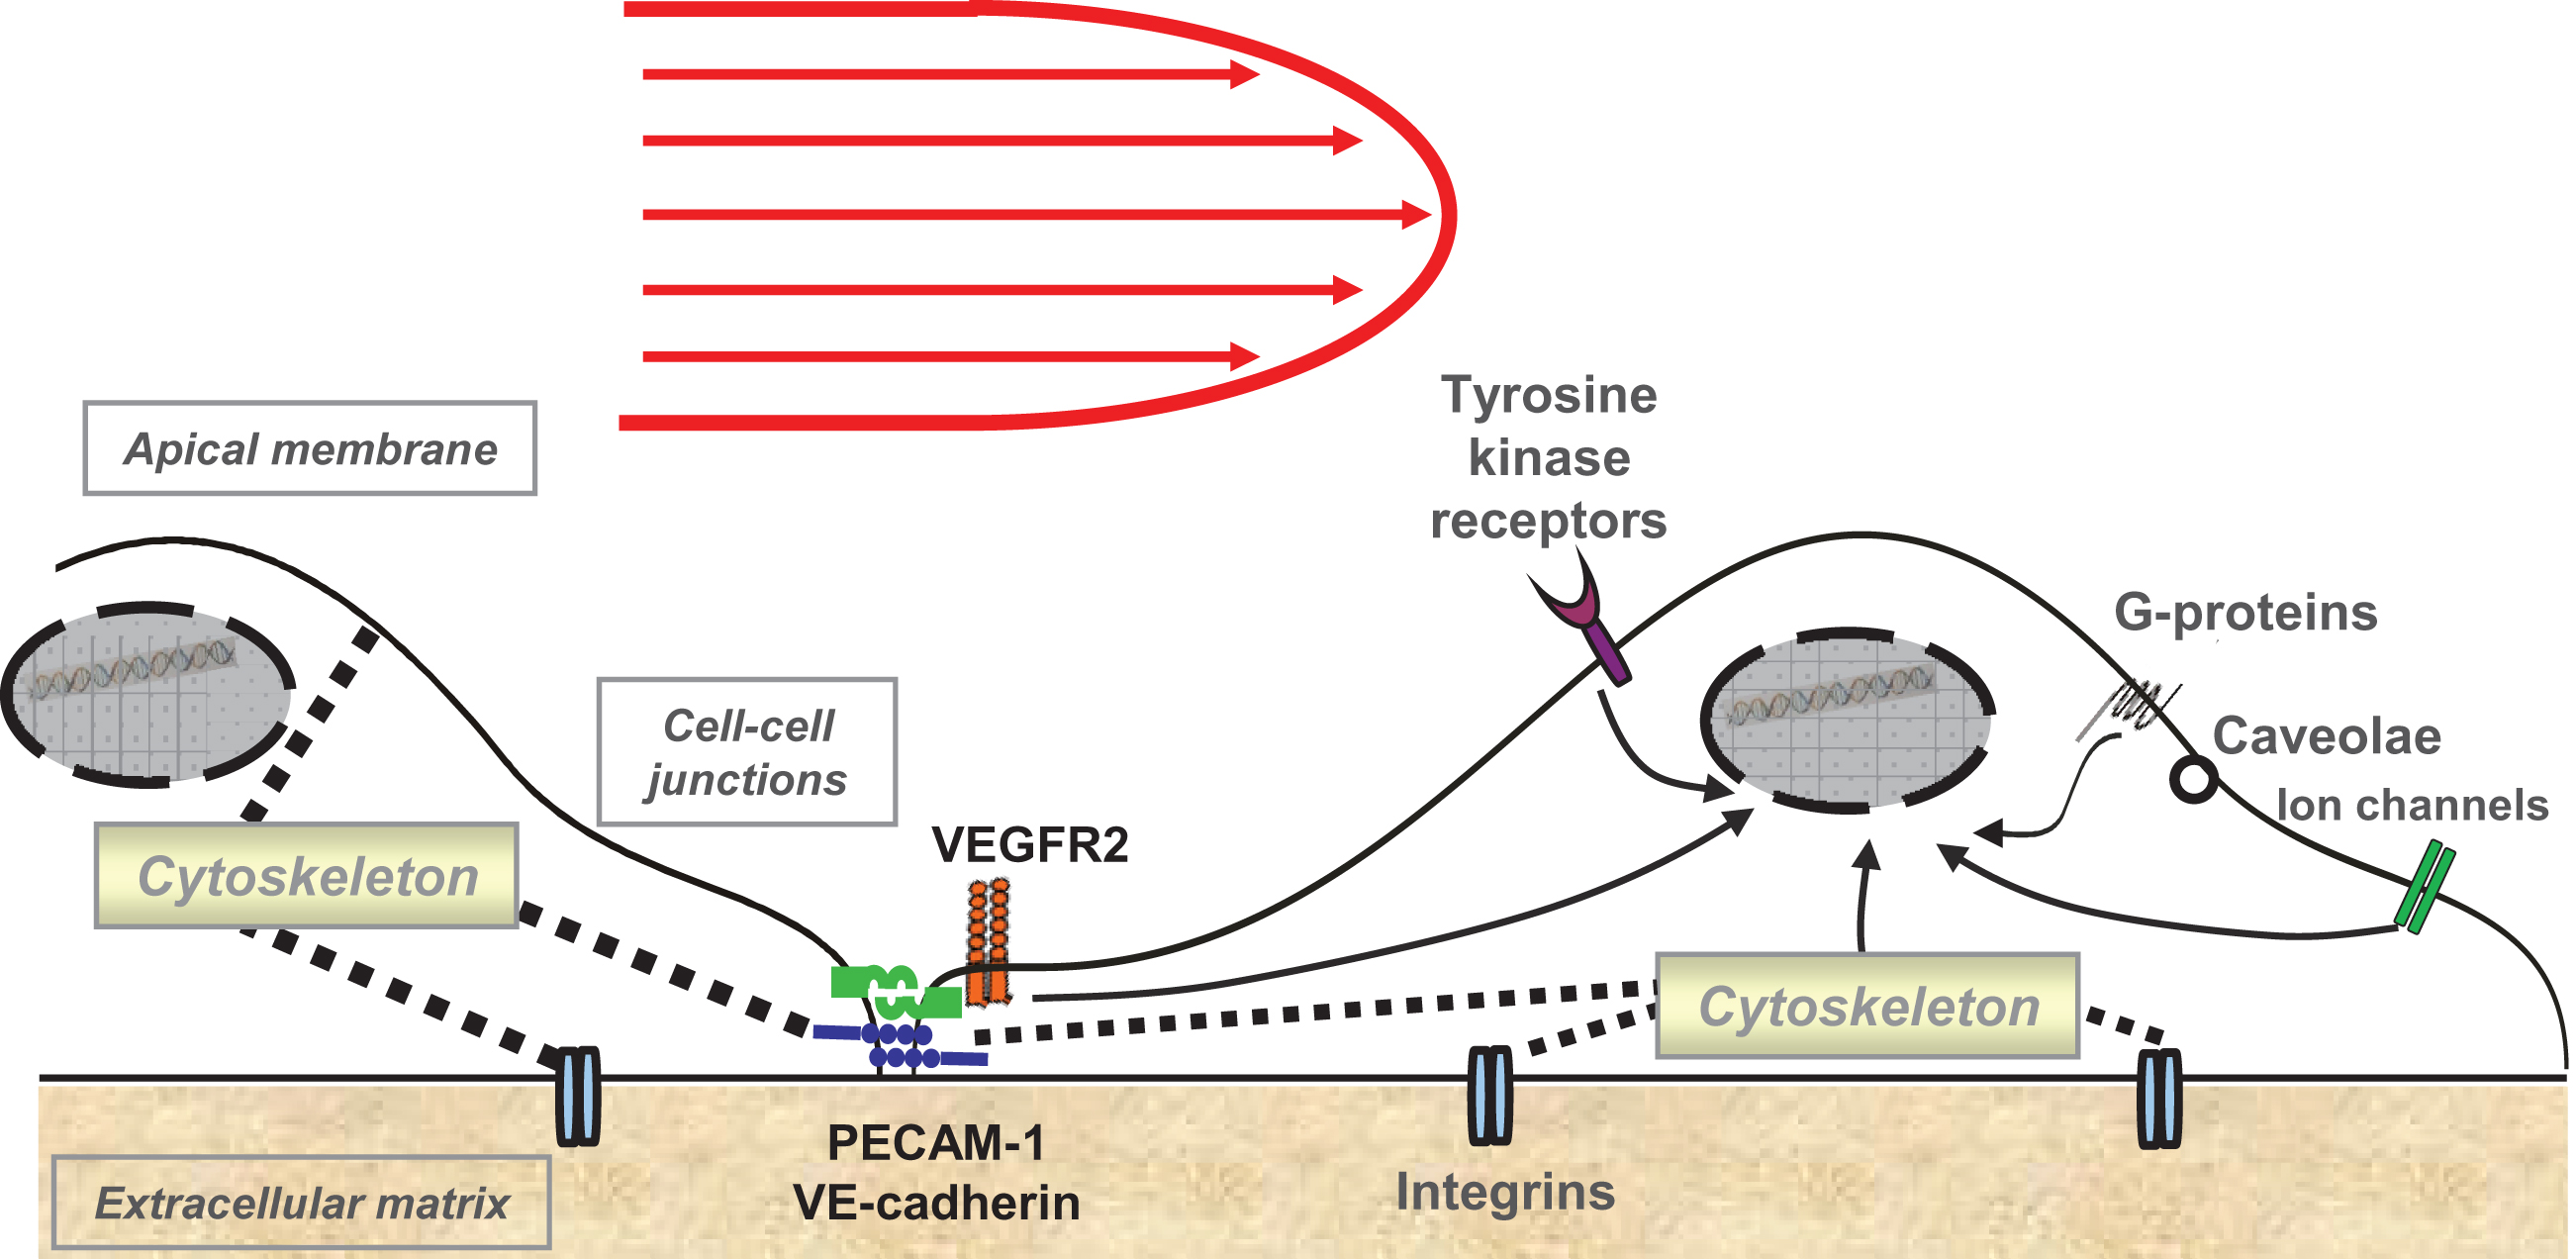 Shear stress-activated signalling pathways in endothelial cells. PECAM-1, platelet-endothelial cell adhesion molecule 1; VE-cadherin, vascular endothelial cadherin, VEGFR2, vascular endothelial growth factor 2.